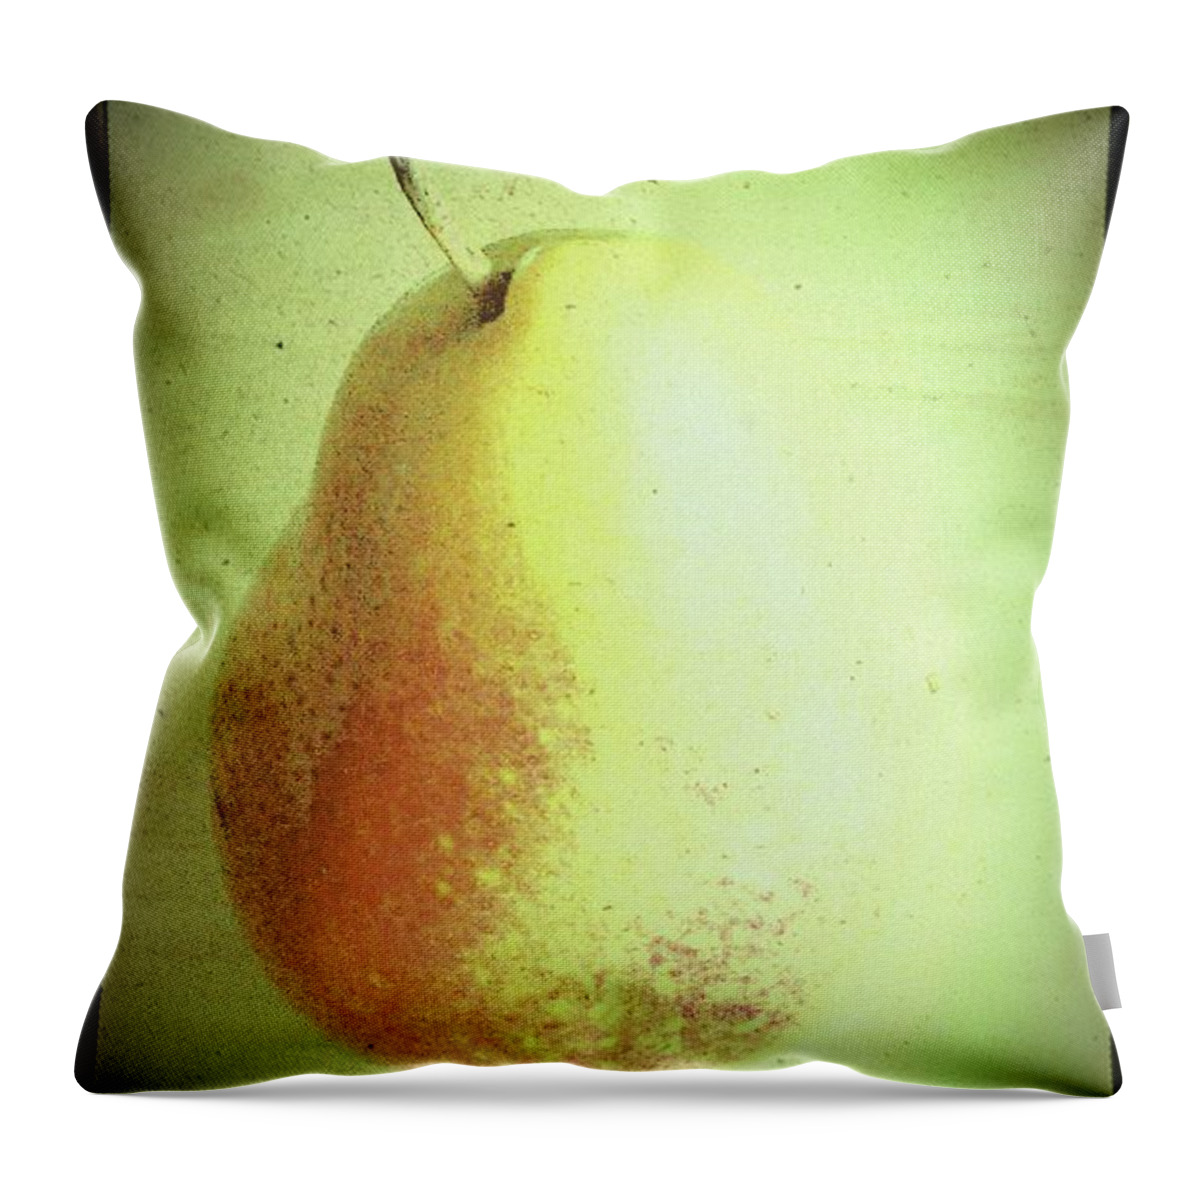 Pear Throw Pillow featuring the photograph Summer Pear by Jacqueline McReynolds